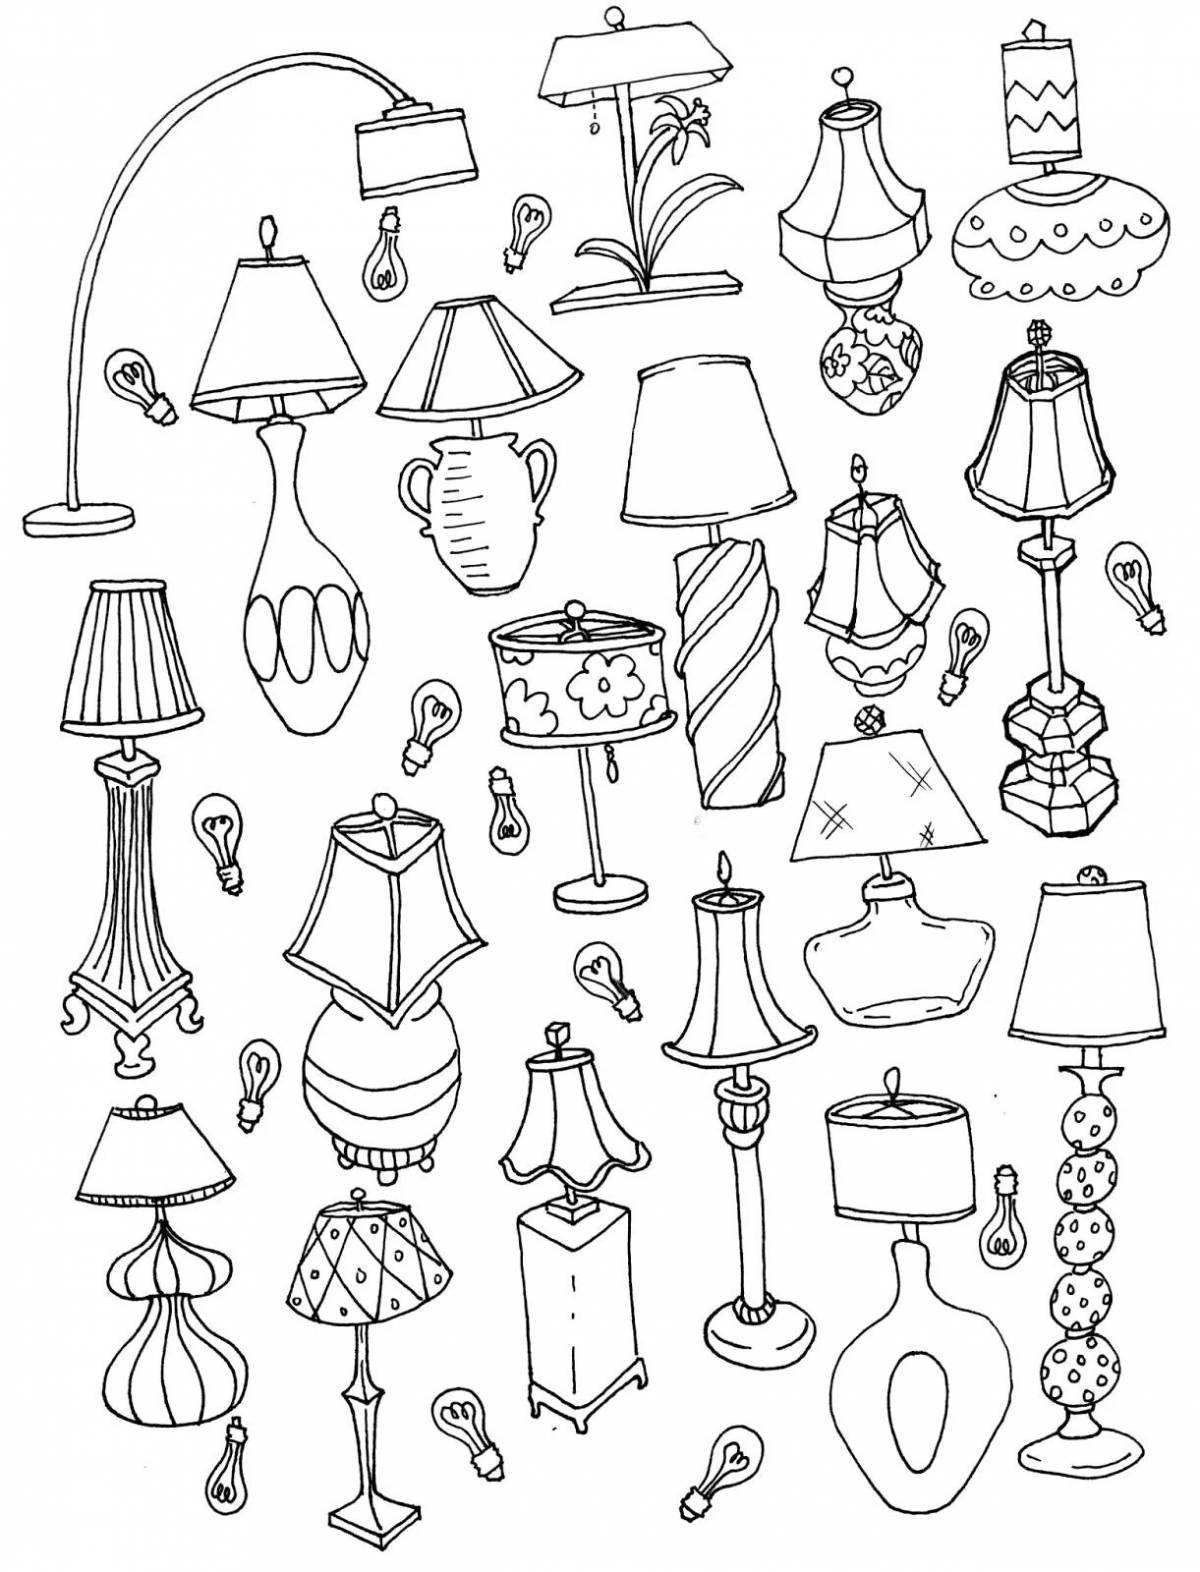 Adorable floor lamp coloring for kids